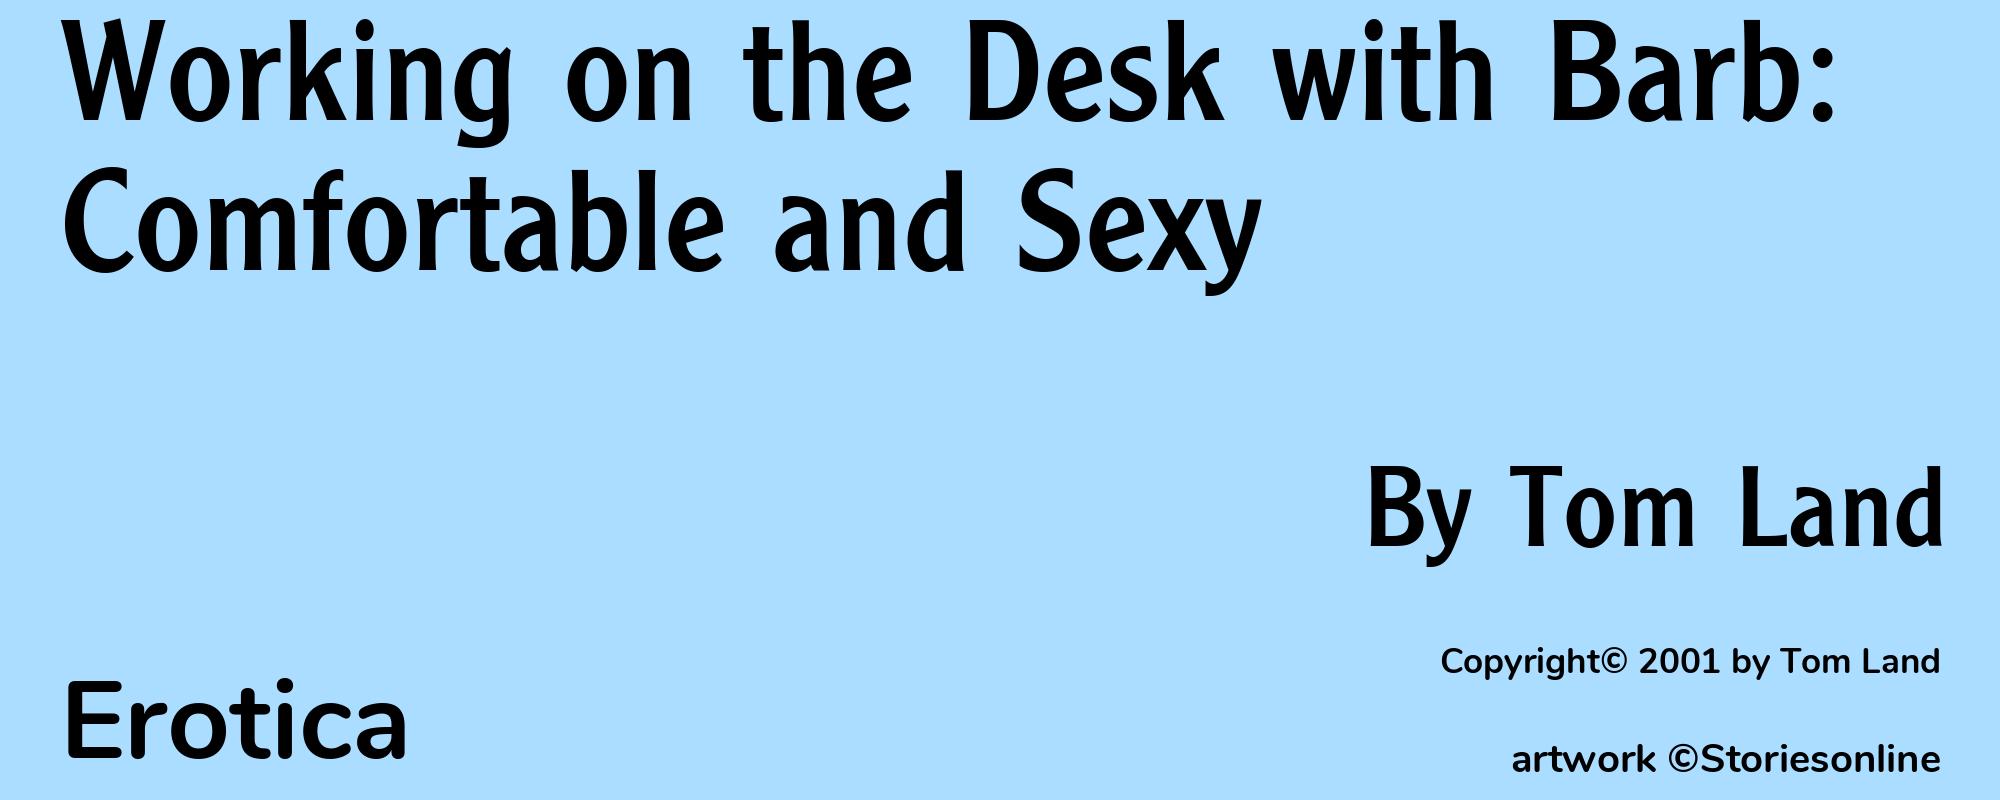 Working on the Desk with Barb: Comfortable and Sexy - Cover